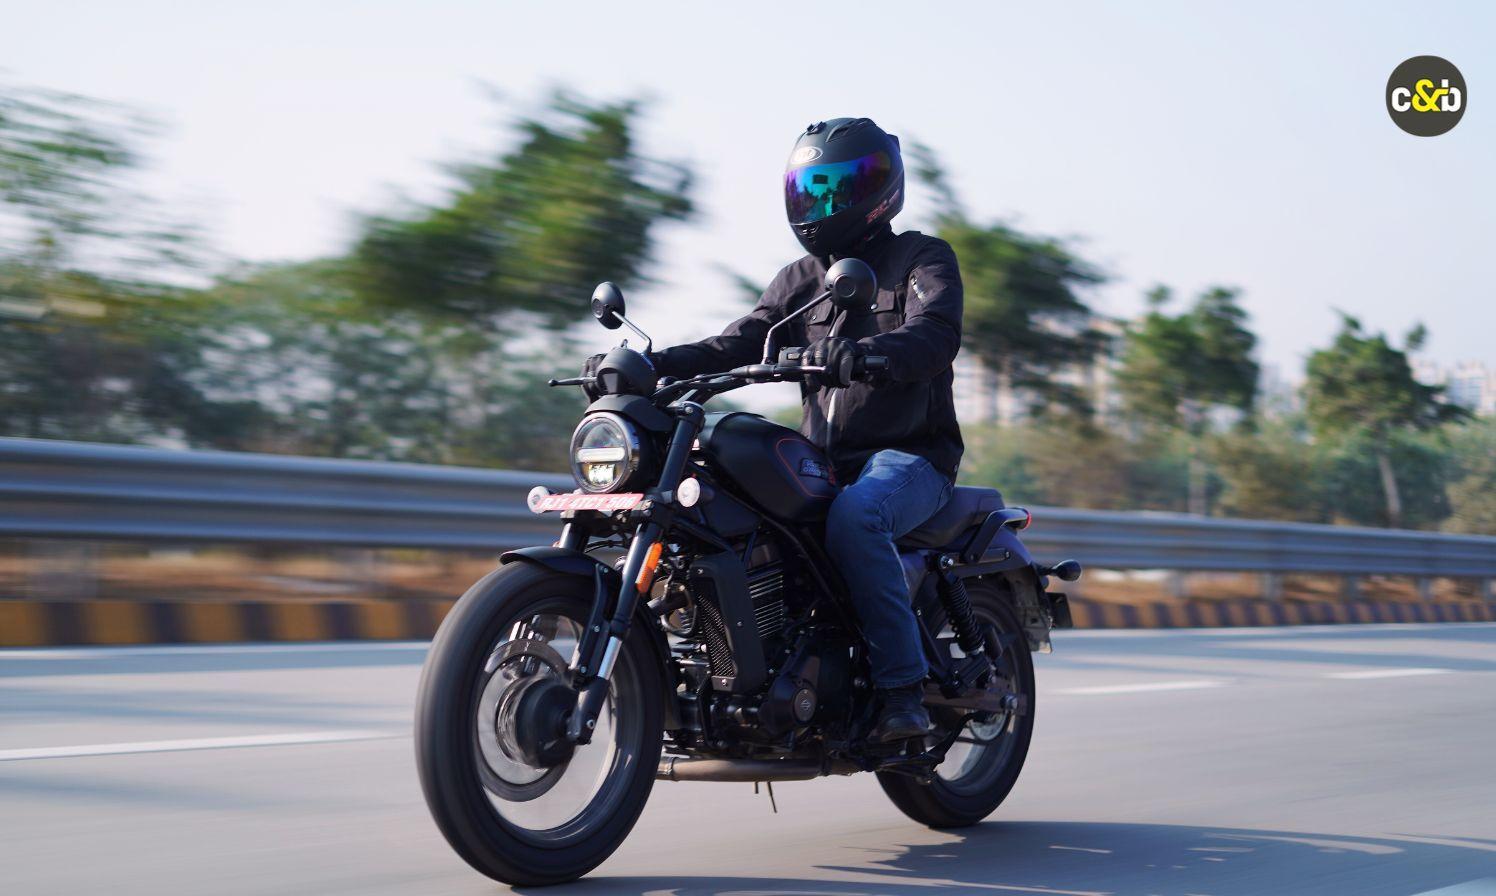 We ride the made-in-India Harley-Davidson X440 on everyday roads, and after spending and living with it for a few days, we come back impressed!